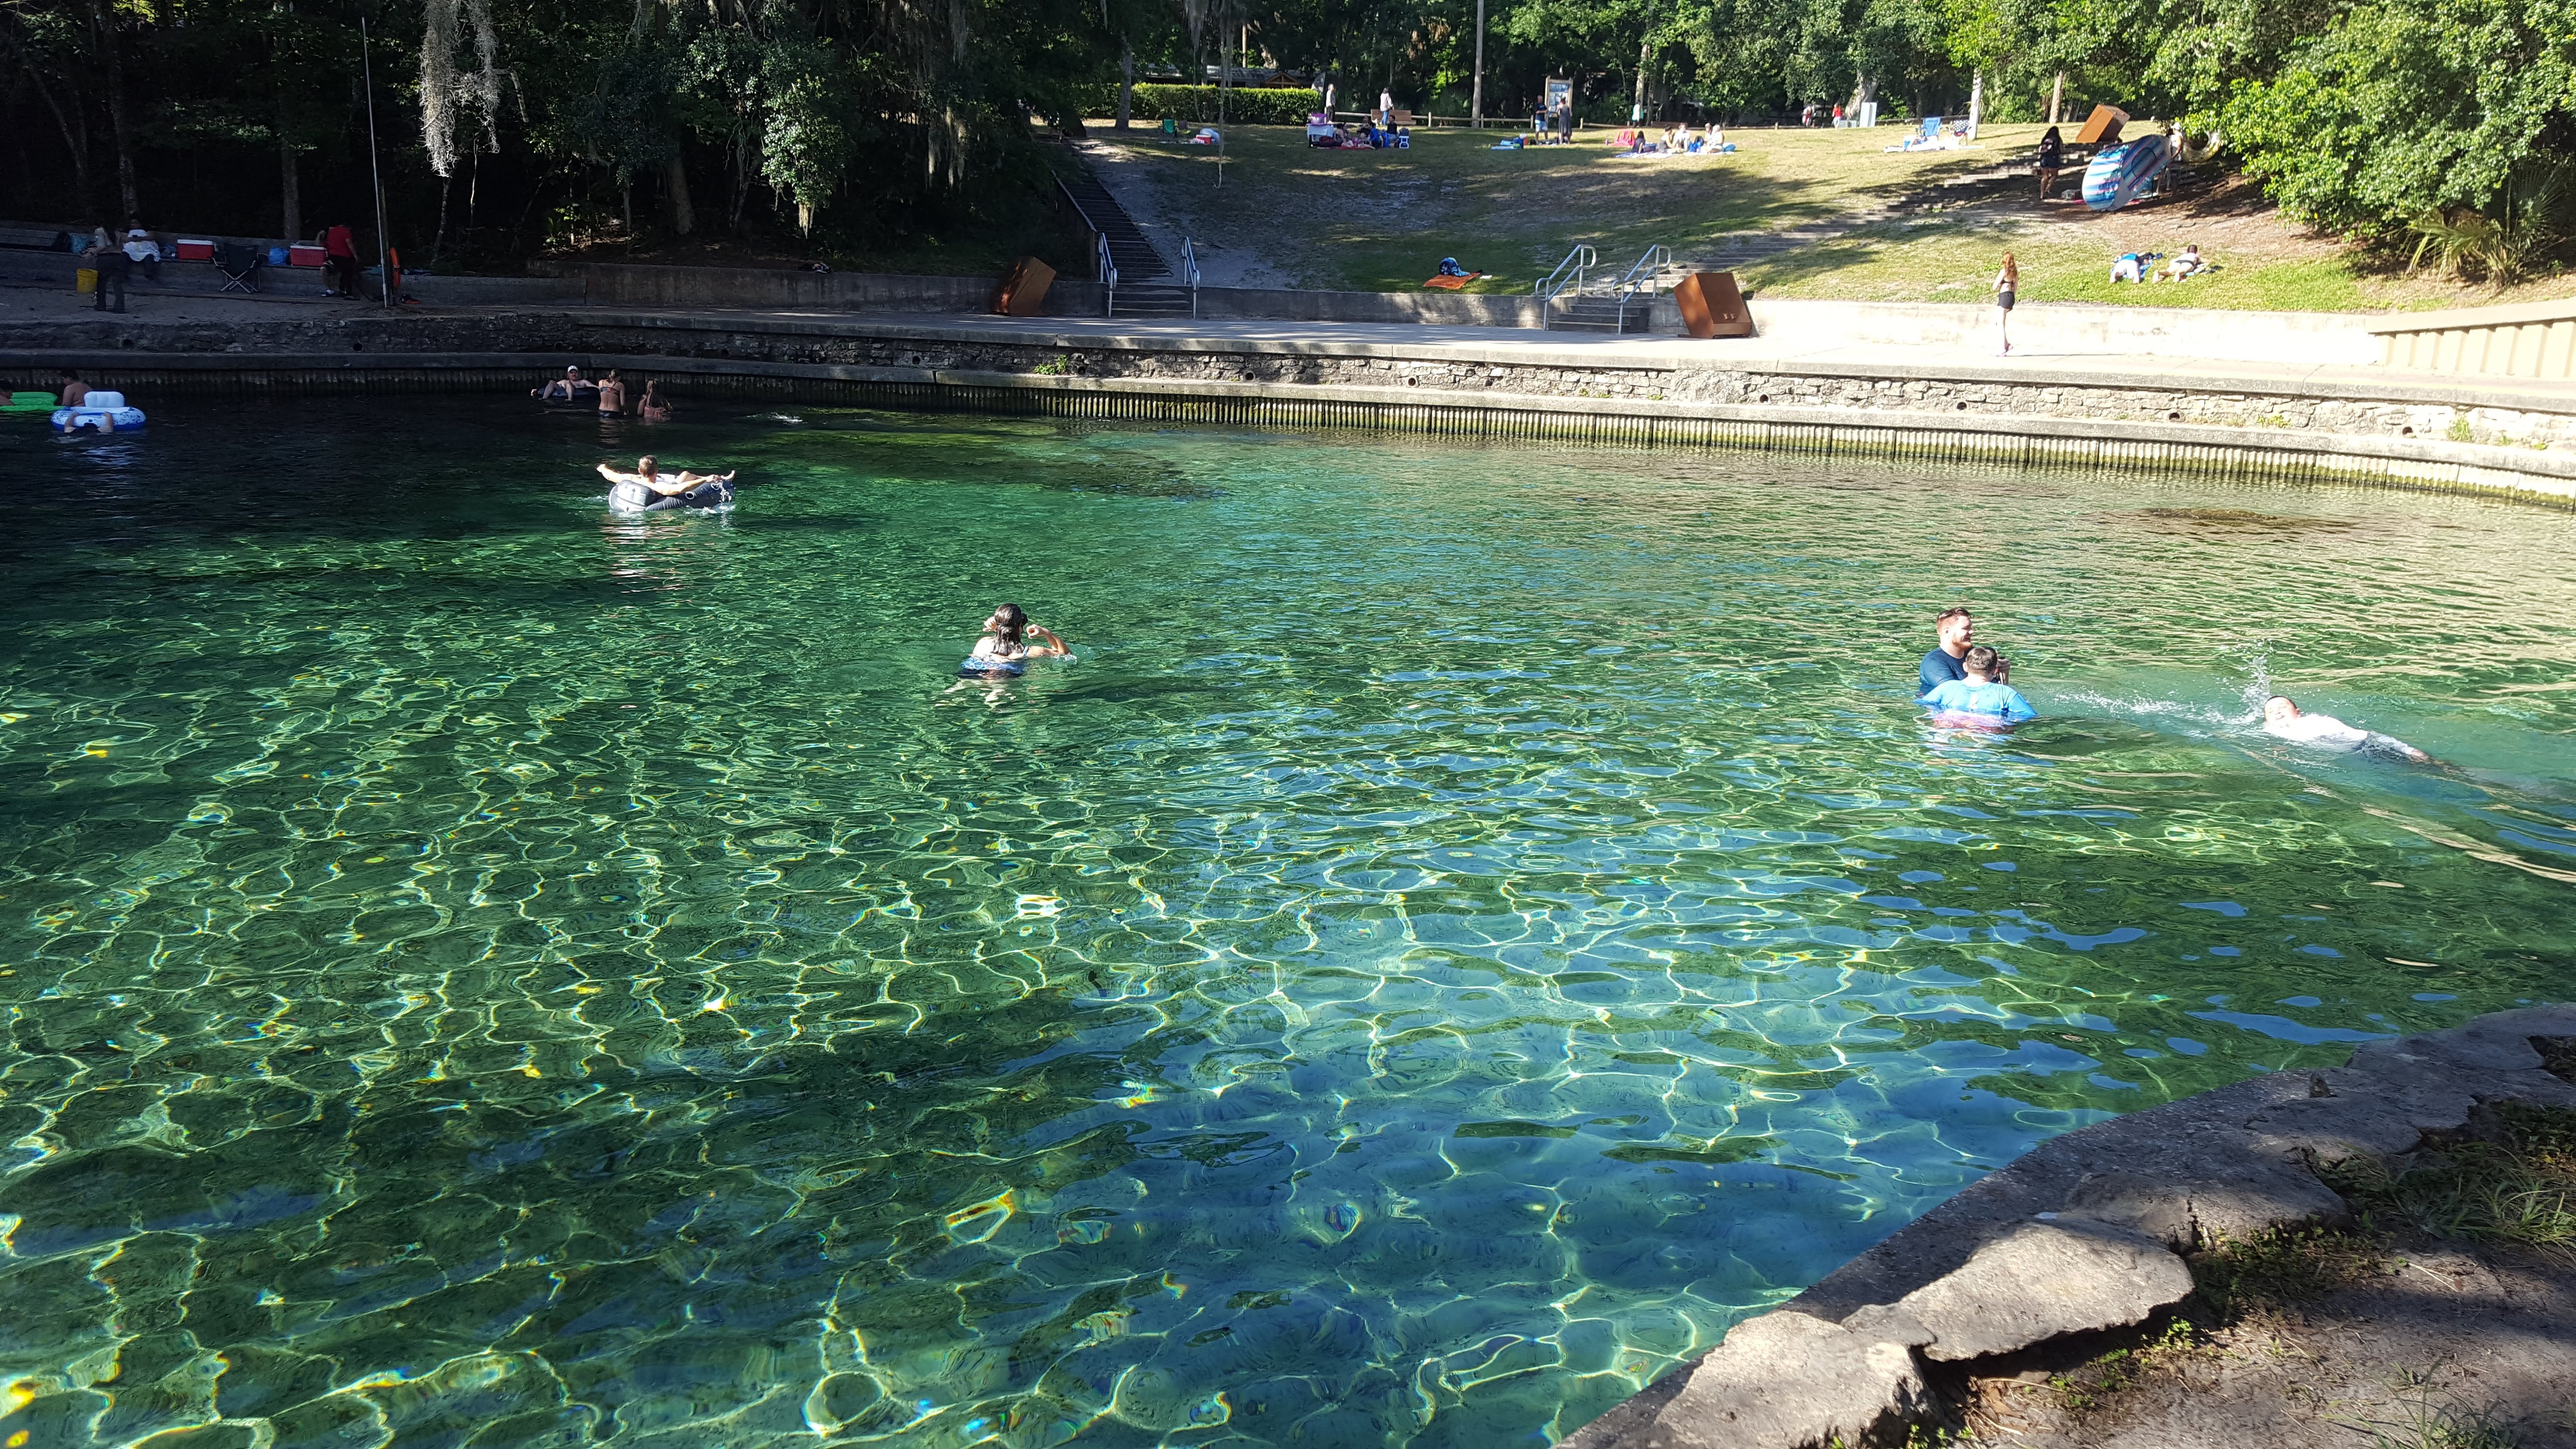 How to Make the Most of Wekiwa Springs State Park